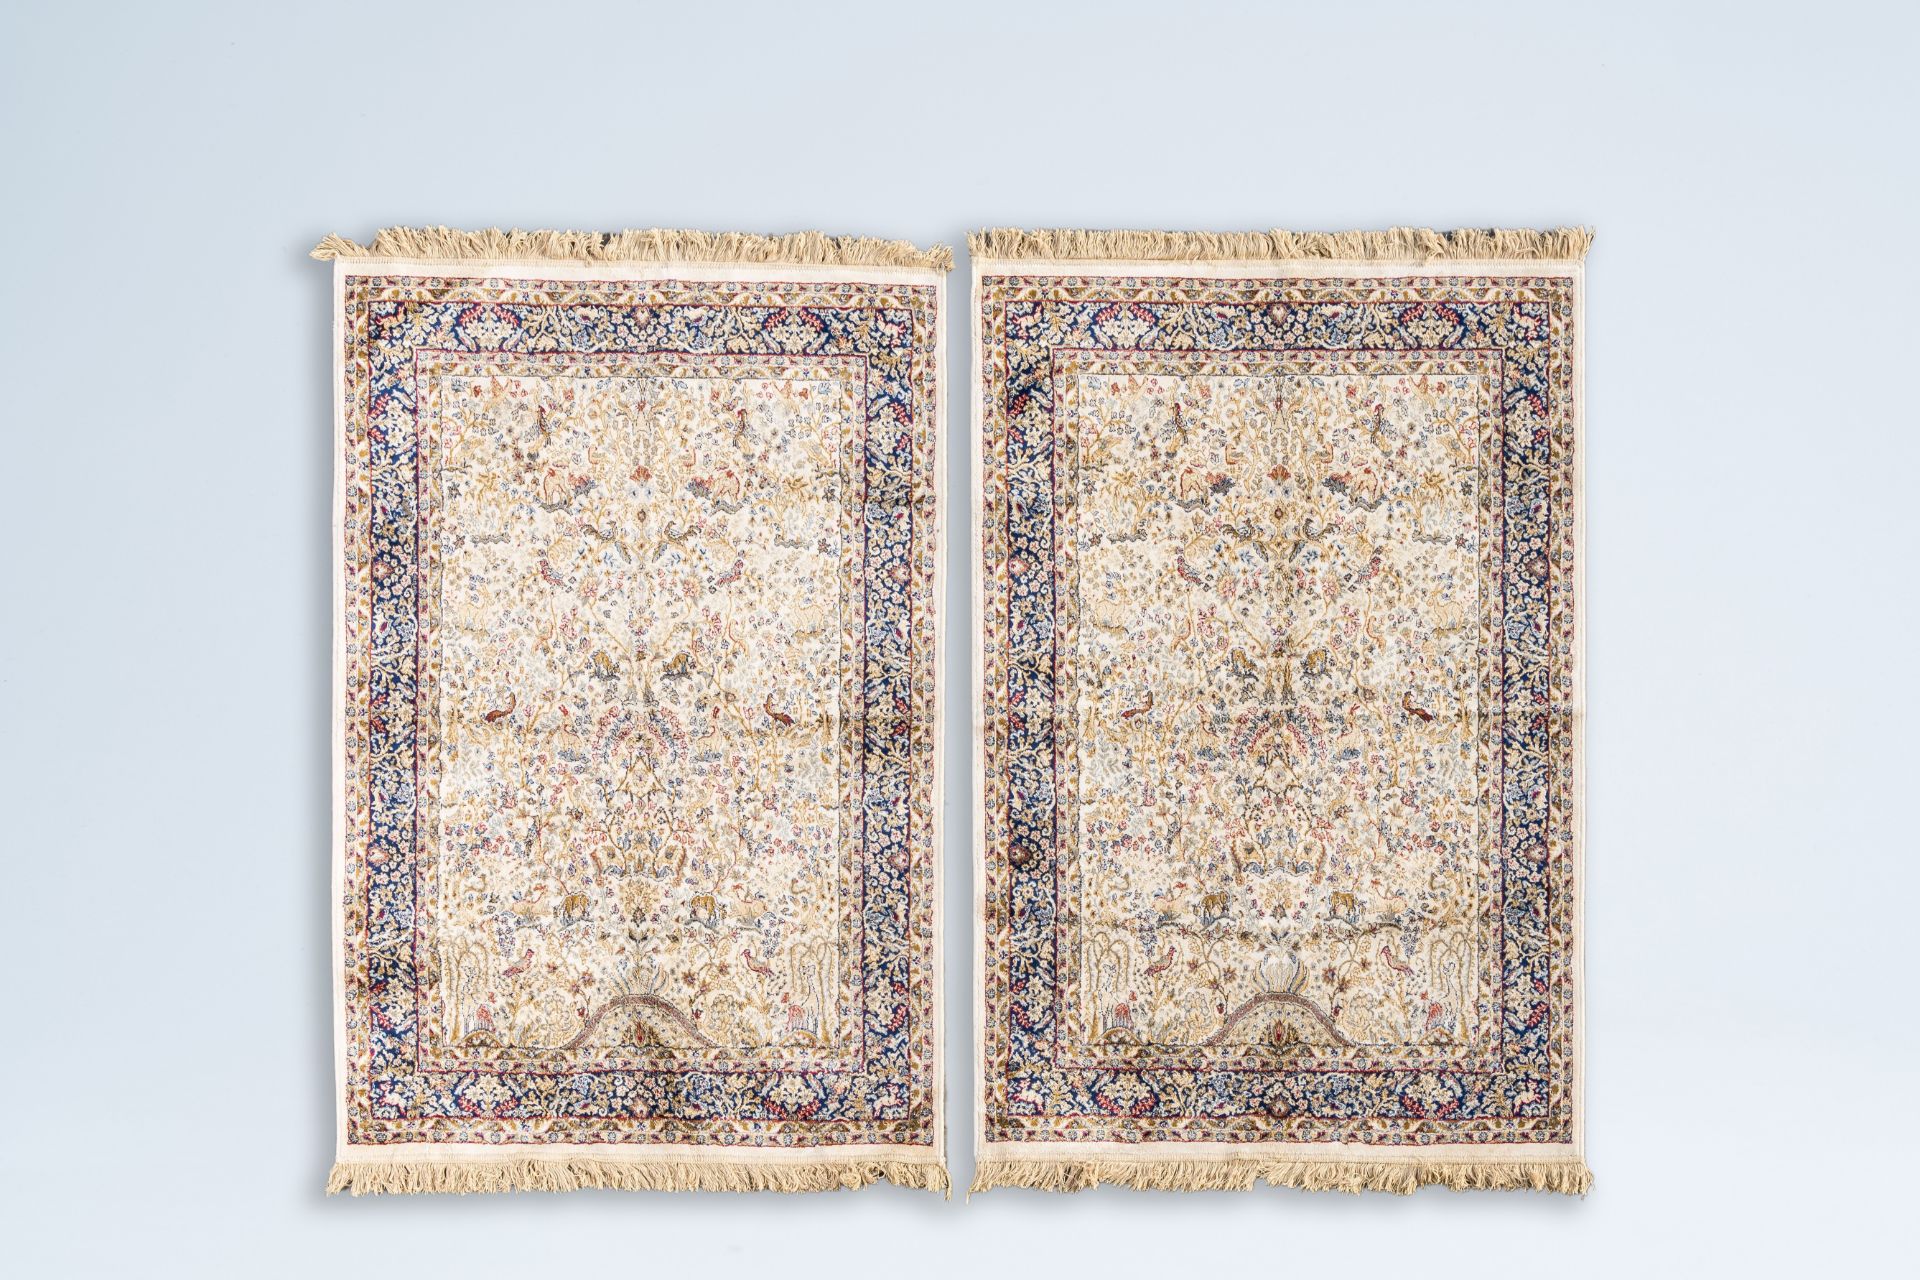 A pair of Iranian Kashmir rugs with birds among blossoming branches, silk on cotton, 20th C.